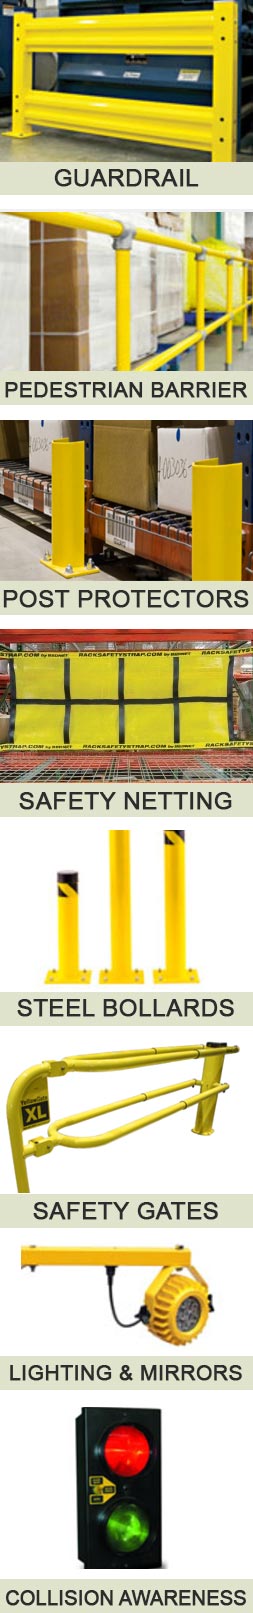 Safety products for collision damage prevention in warehouses and distribution centers - Dallas TX